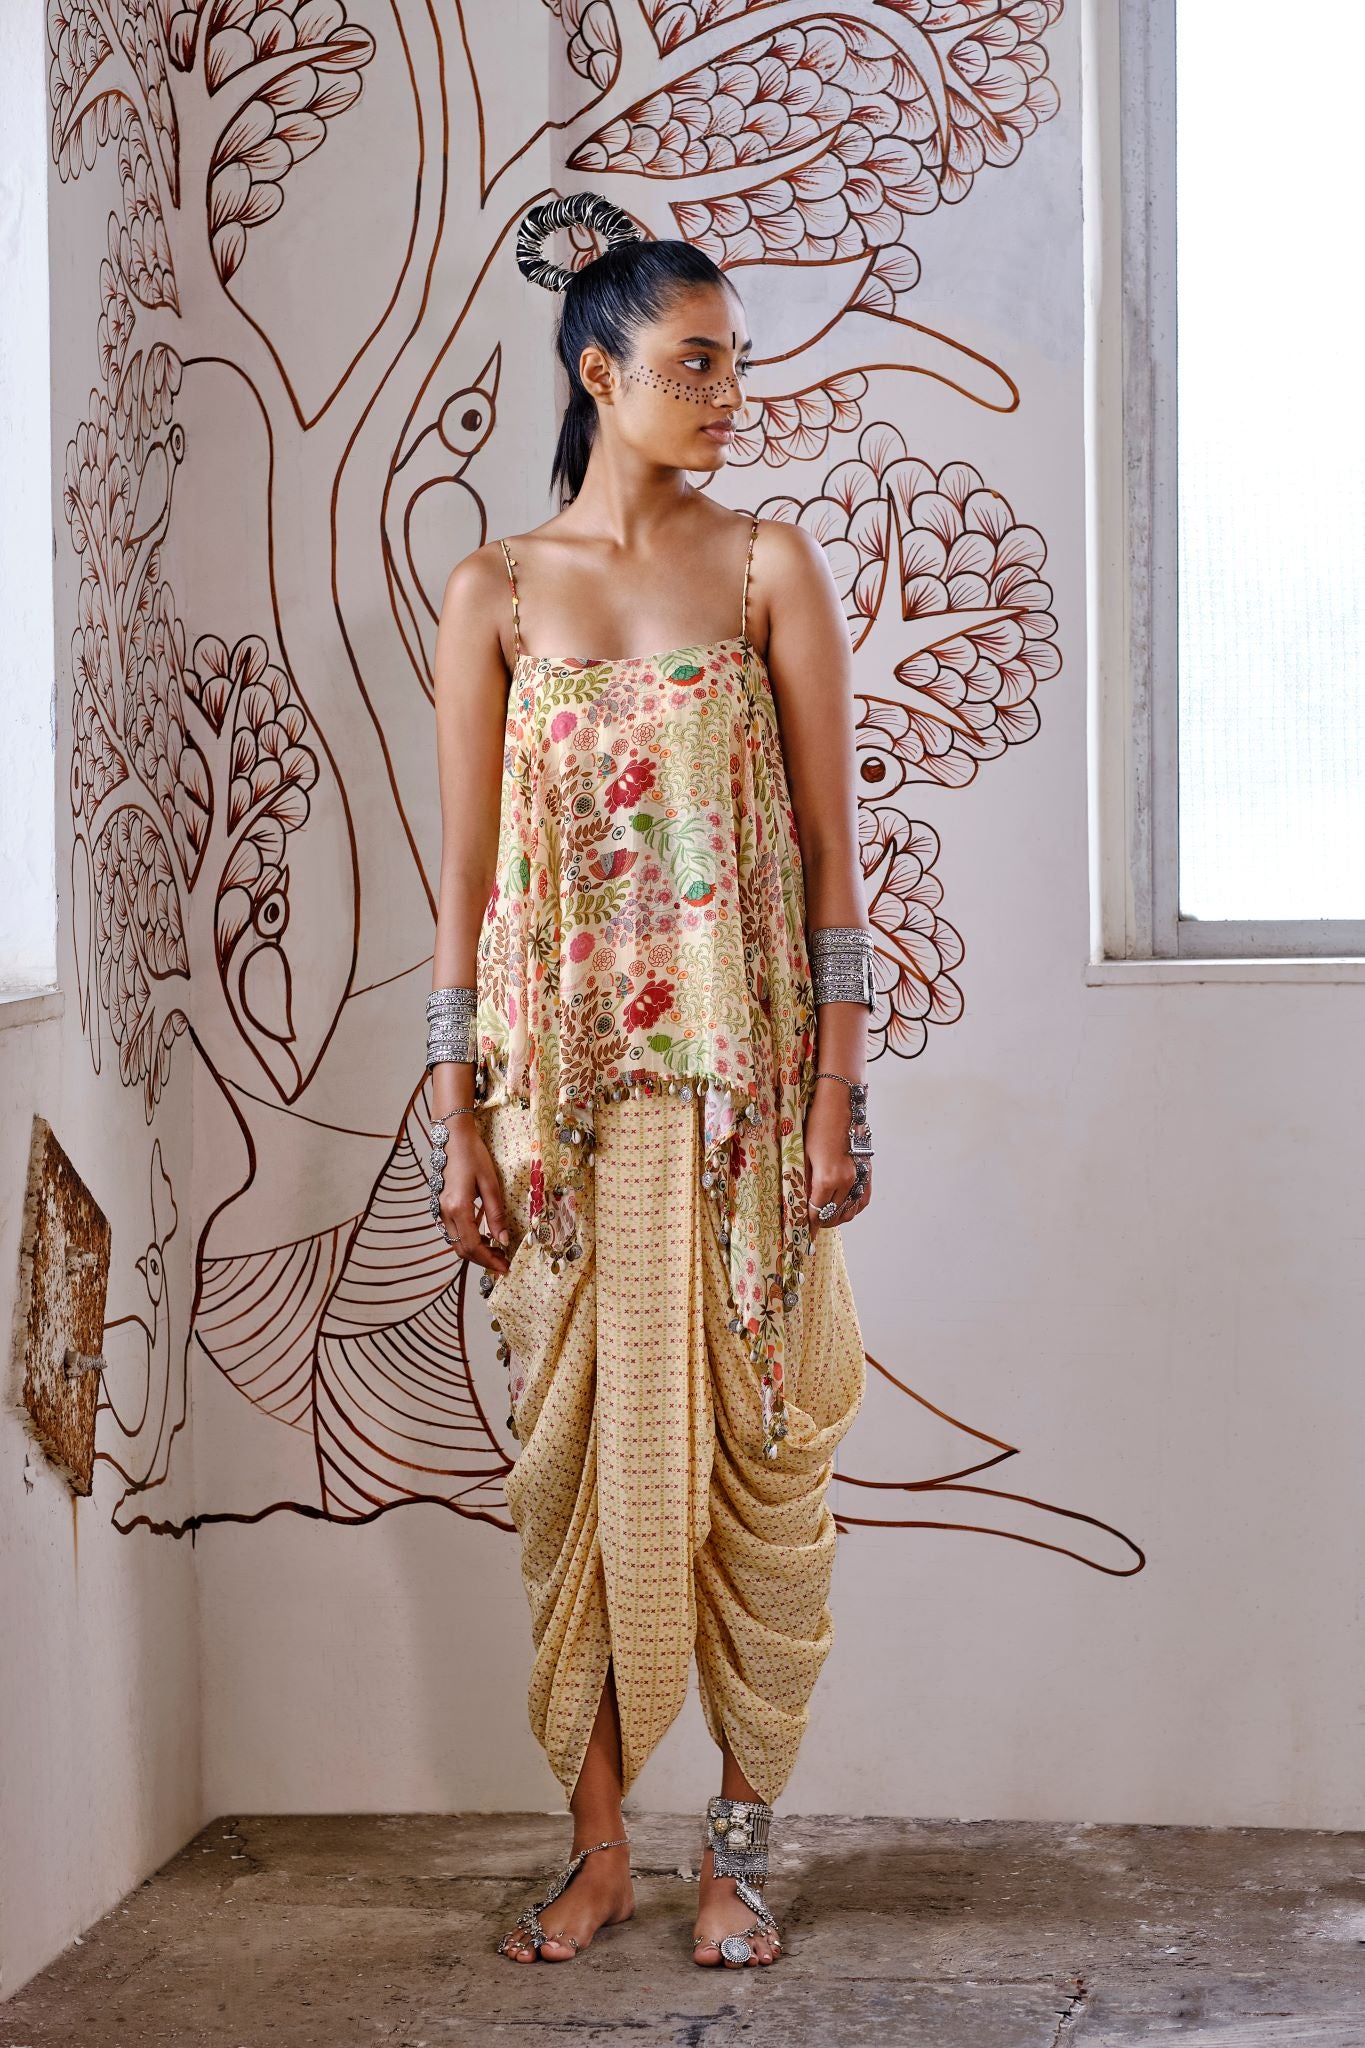 Buy Mint Green Printed Dhoti Pants Online - W for Woman